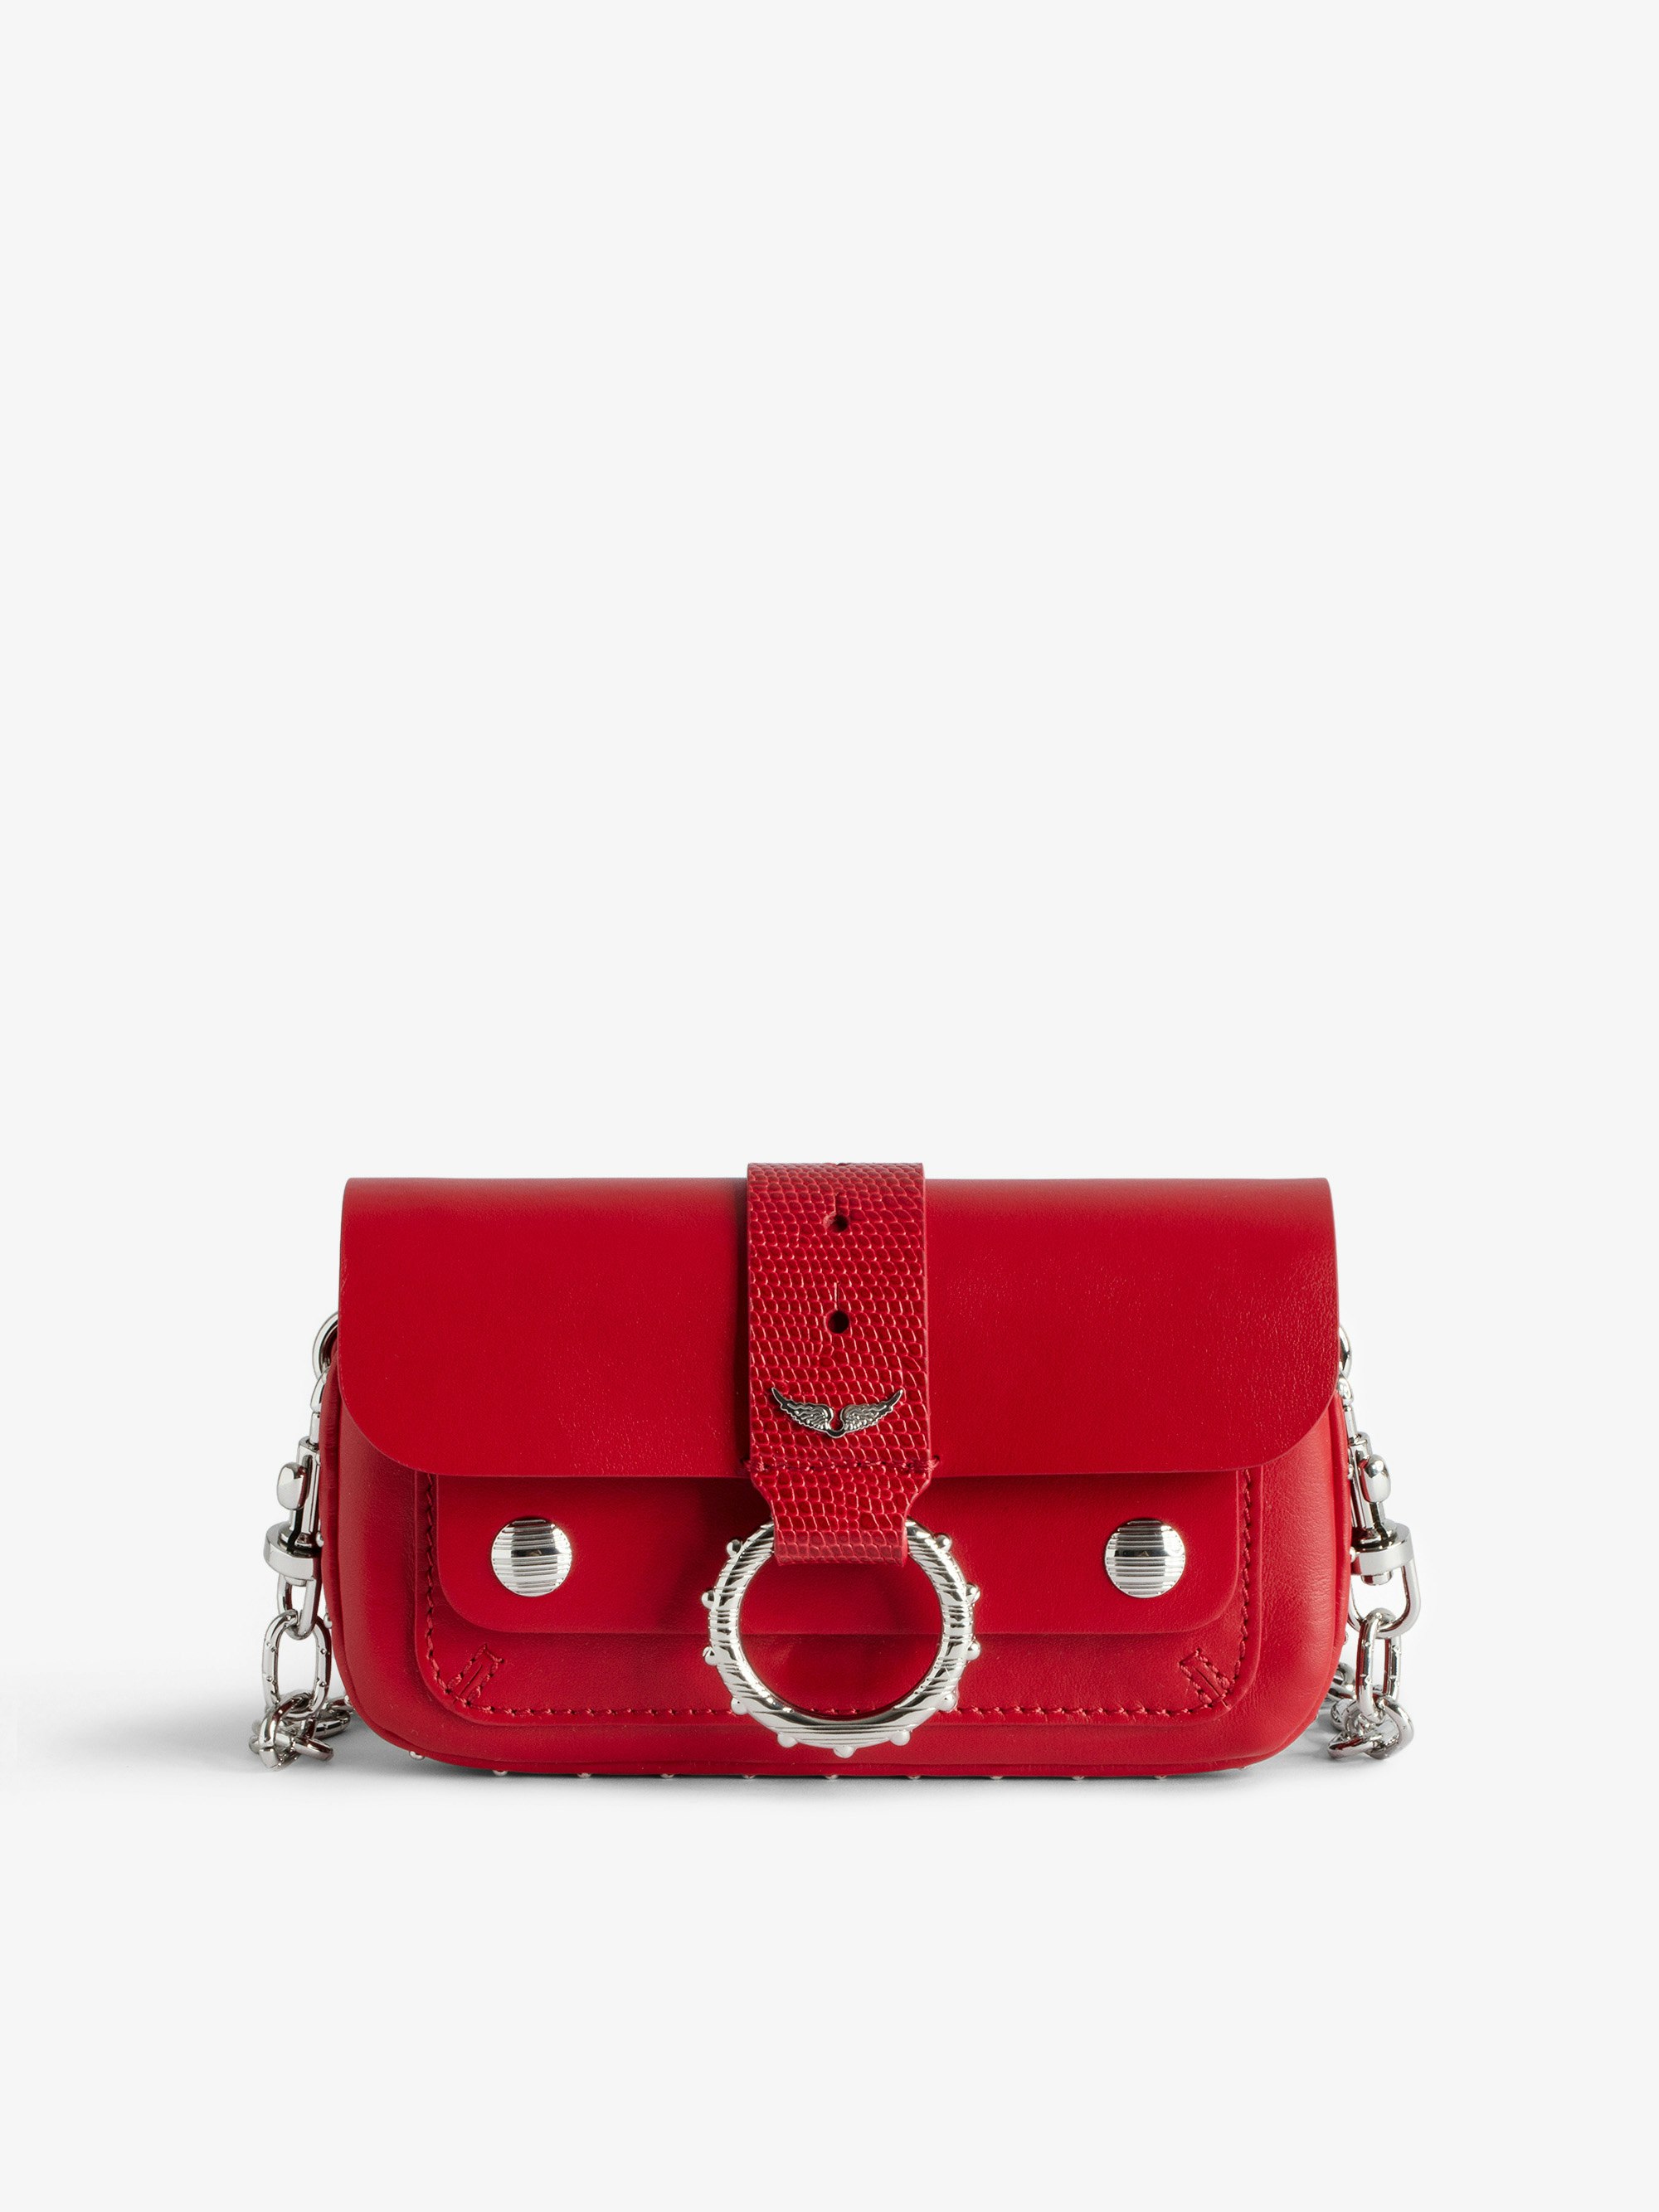 Kate Wallet Bag - Women’s red smooth leather mini bag with metal chain and iguana-embossed leather loop.